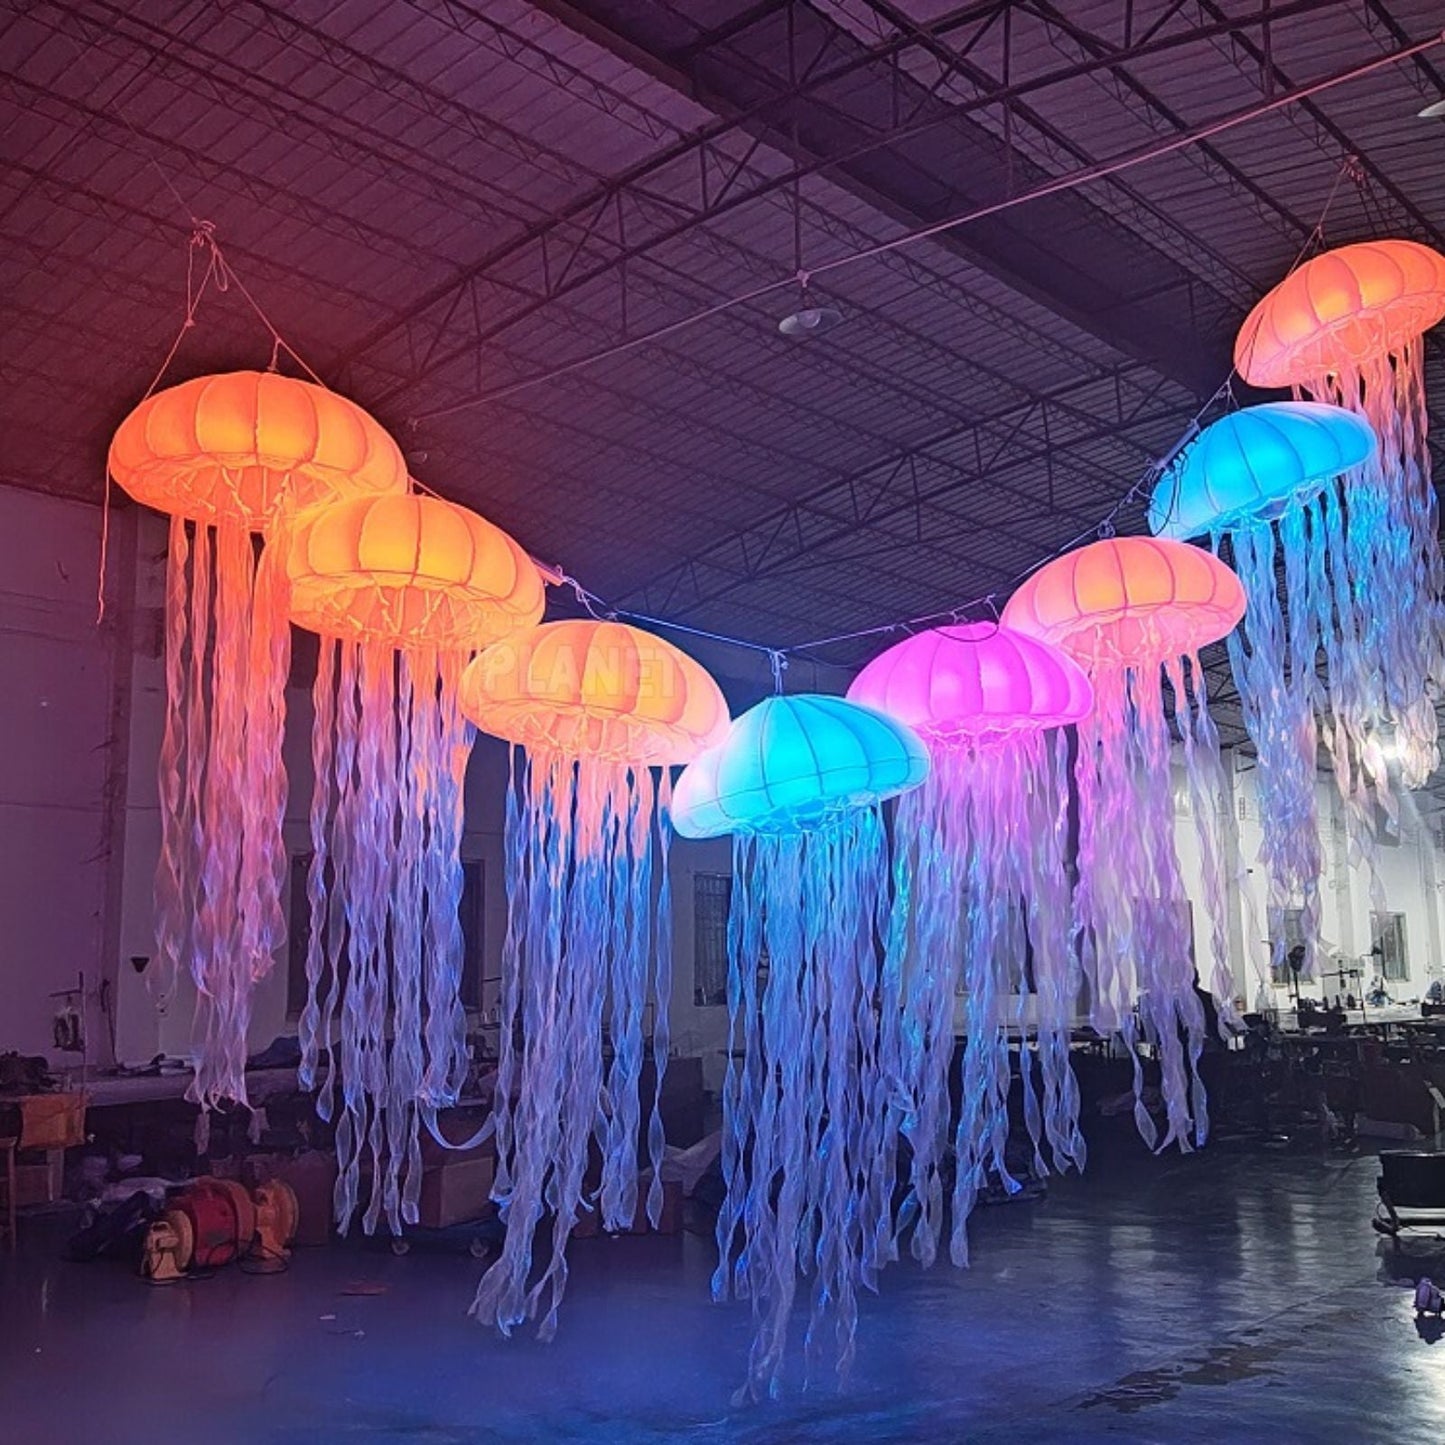 Giant Inflatable Jellyfish Lamp 3.3 * 8.3FT with 16 Colors LED Lighting for Party, Bar, Event Wedding Decoration Inflatable Jellyfish Lighting (3Pcs)